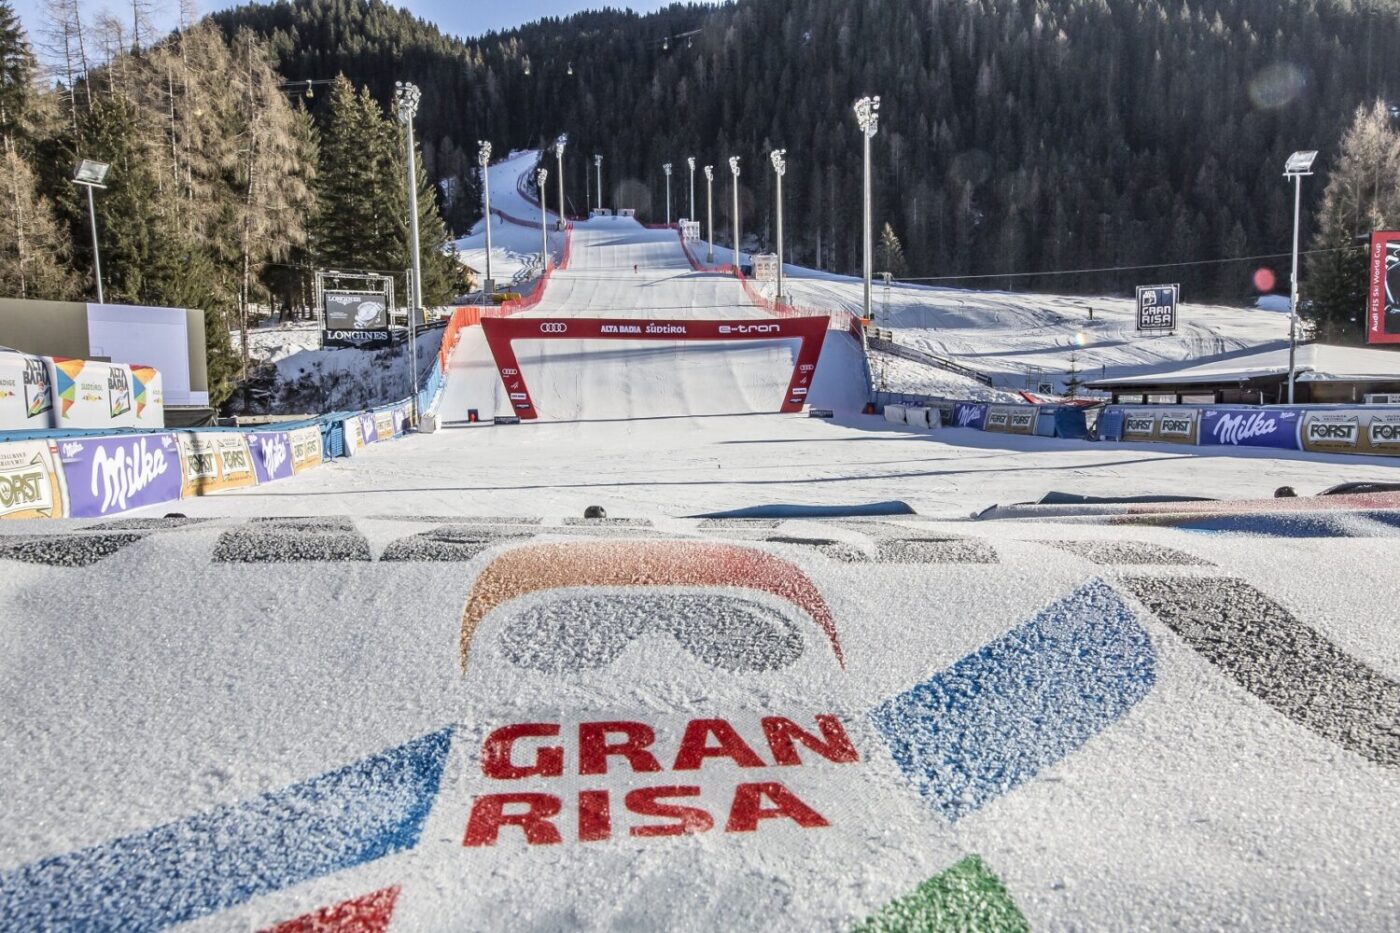 The Gran Risa piste gets ready for the Alta Badia Ski World Cup. Photo: Alta Badia- Freddy Planinsche- Alta Badia will host a Giant Slalom and a Slalom. This will be the 35th edition of the Ski World Cup in Alta Badia.